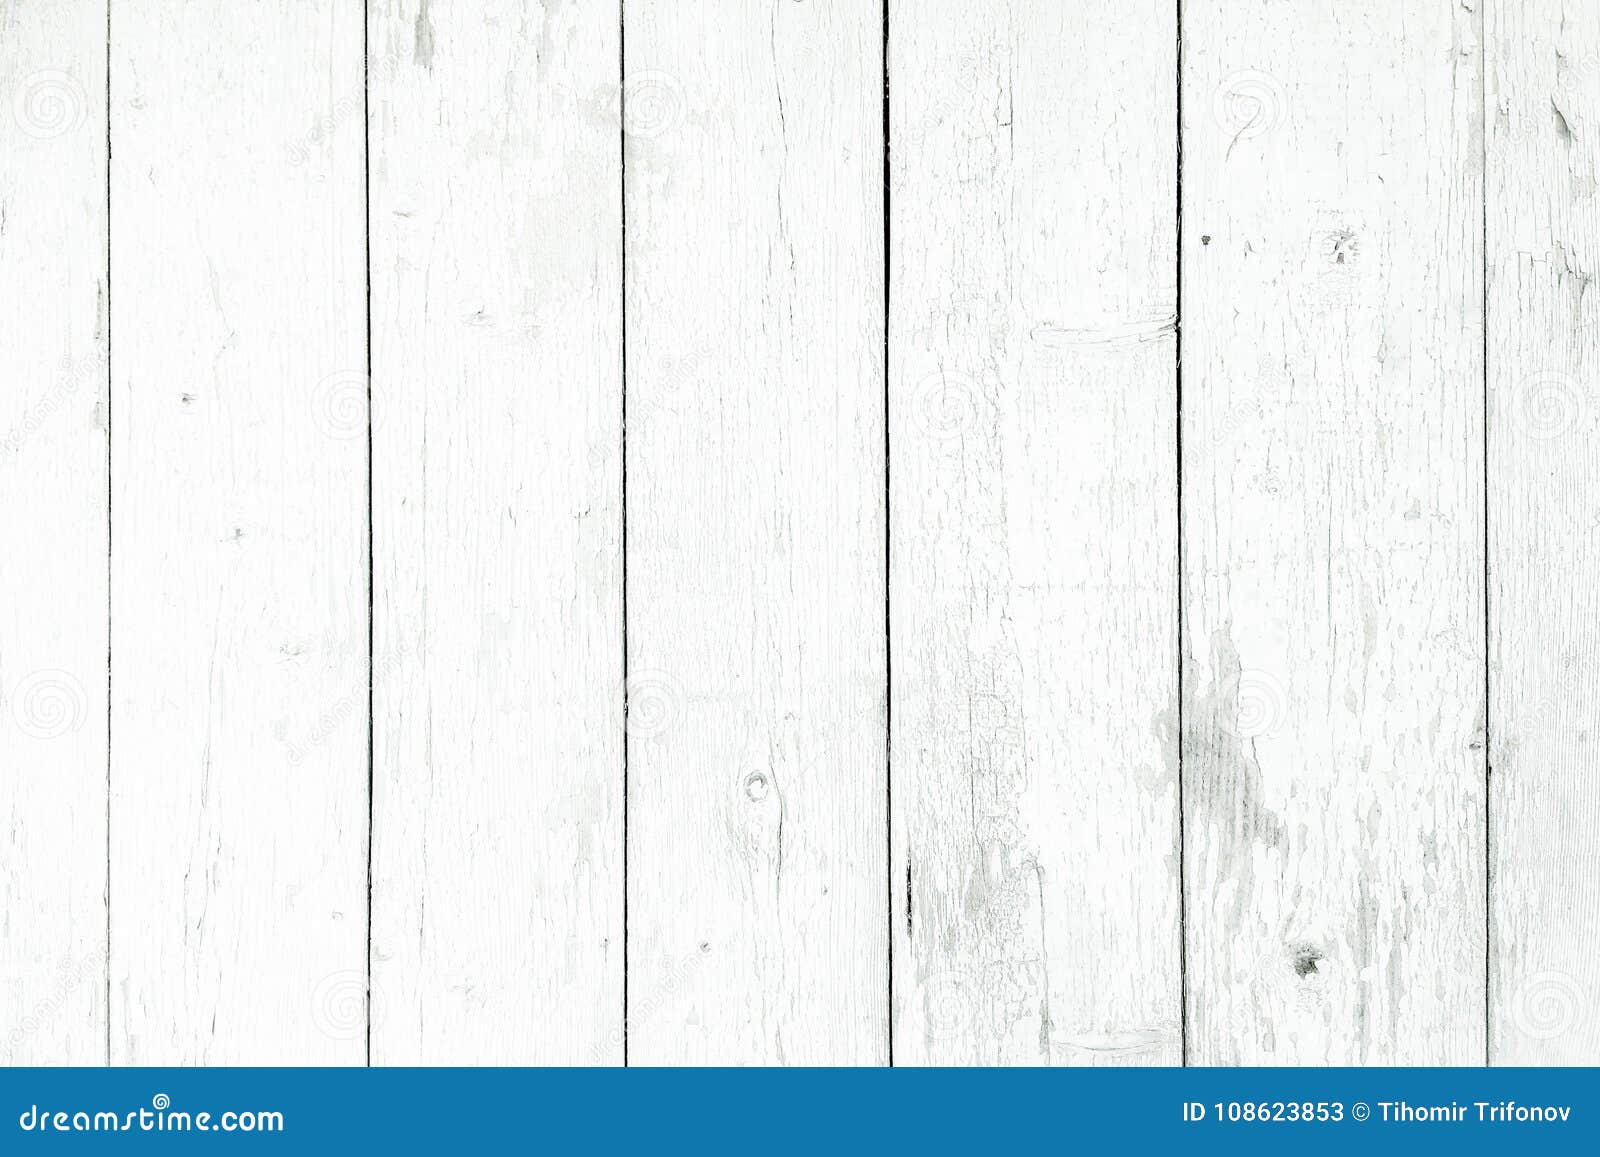 wood texture background, white wood planks. grunge washed wood wall pattern.